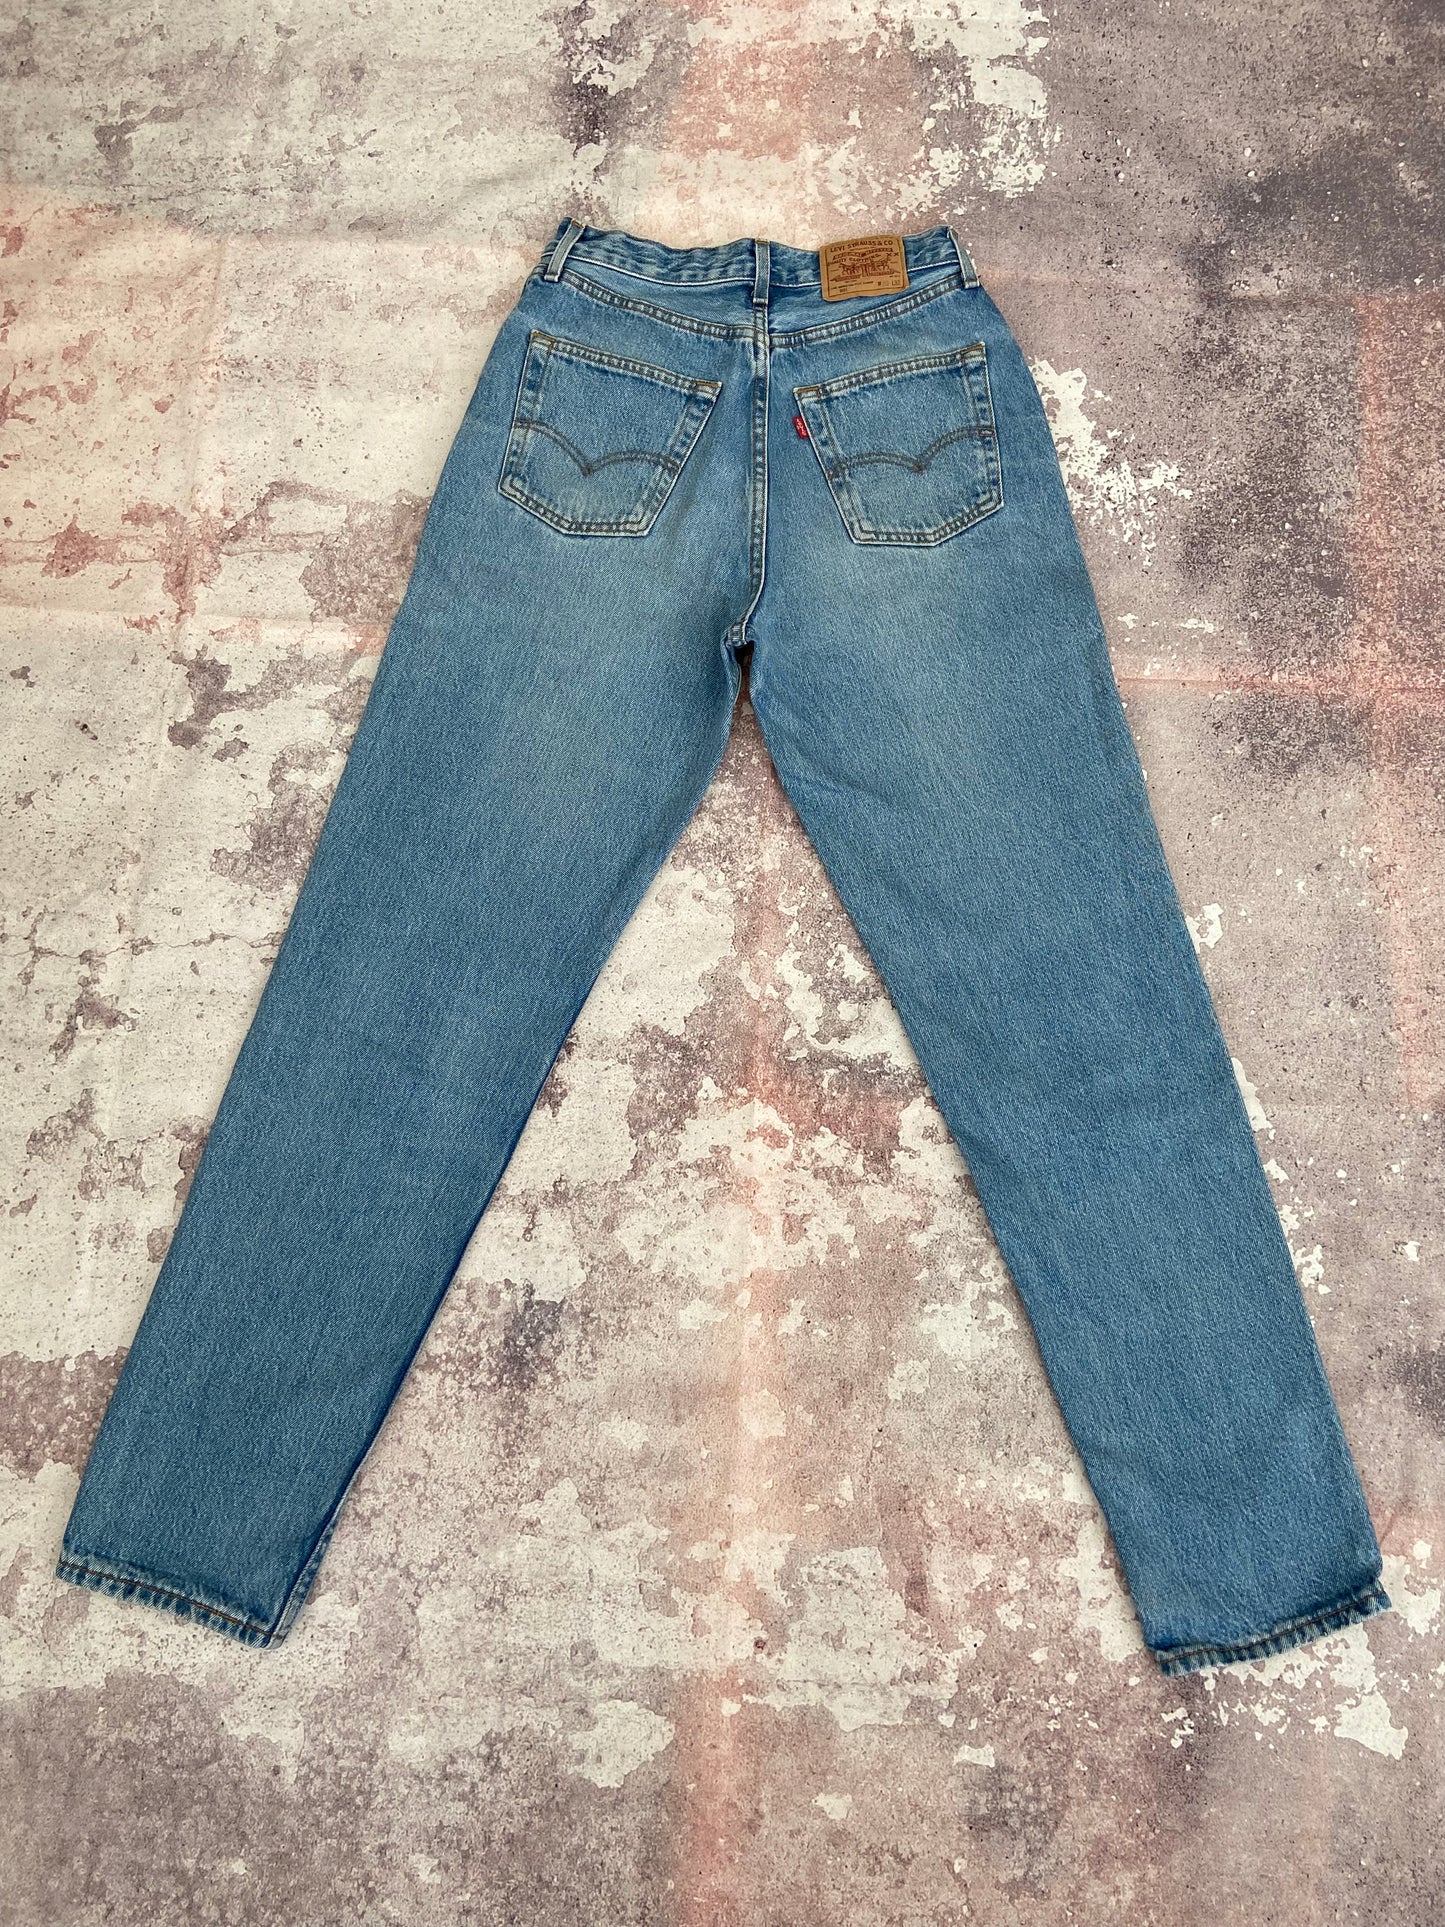 Funky Cat - Vintage Levi's Jeans made in USA